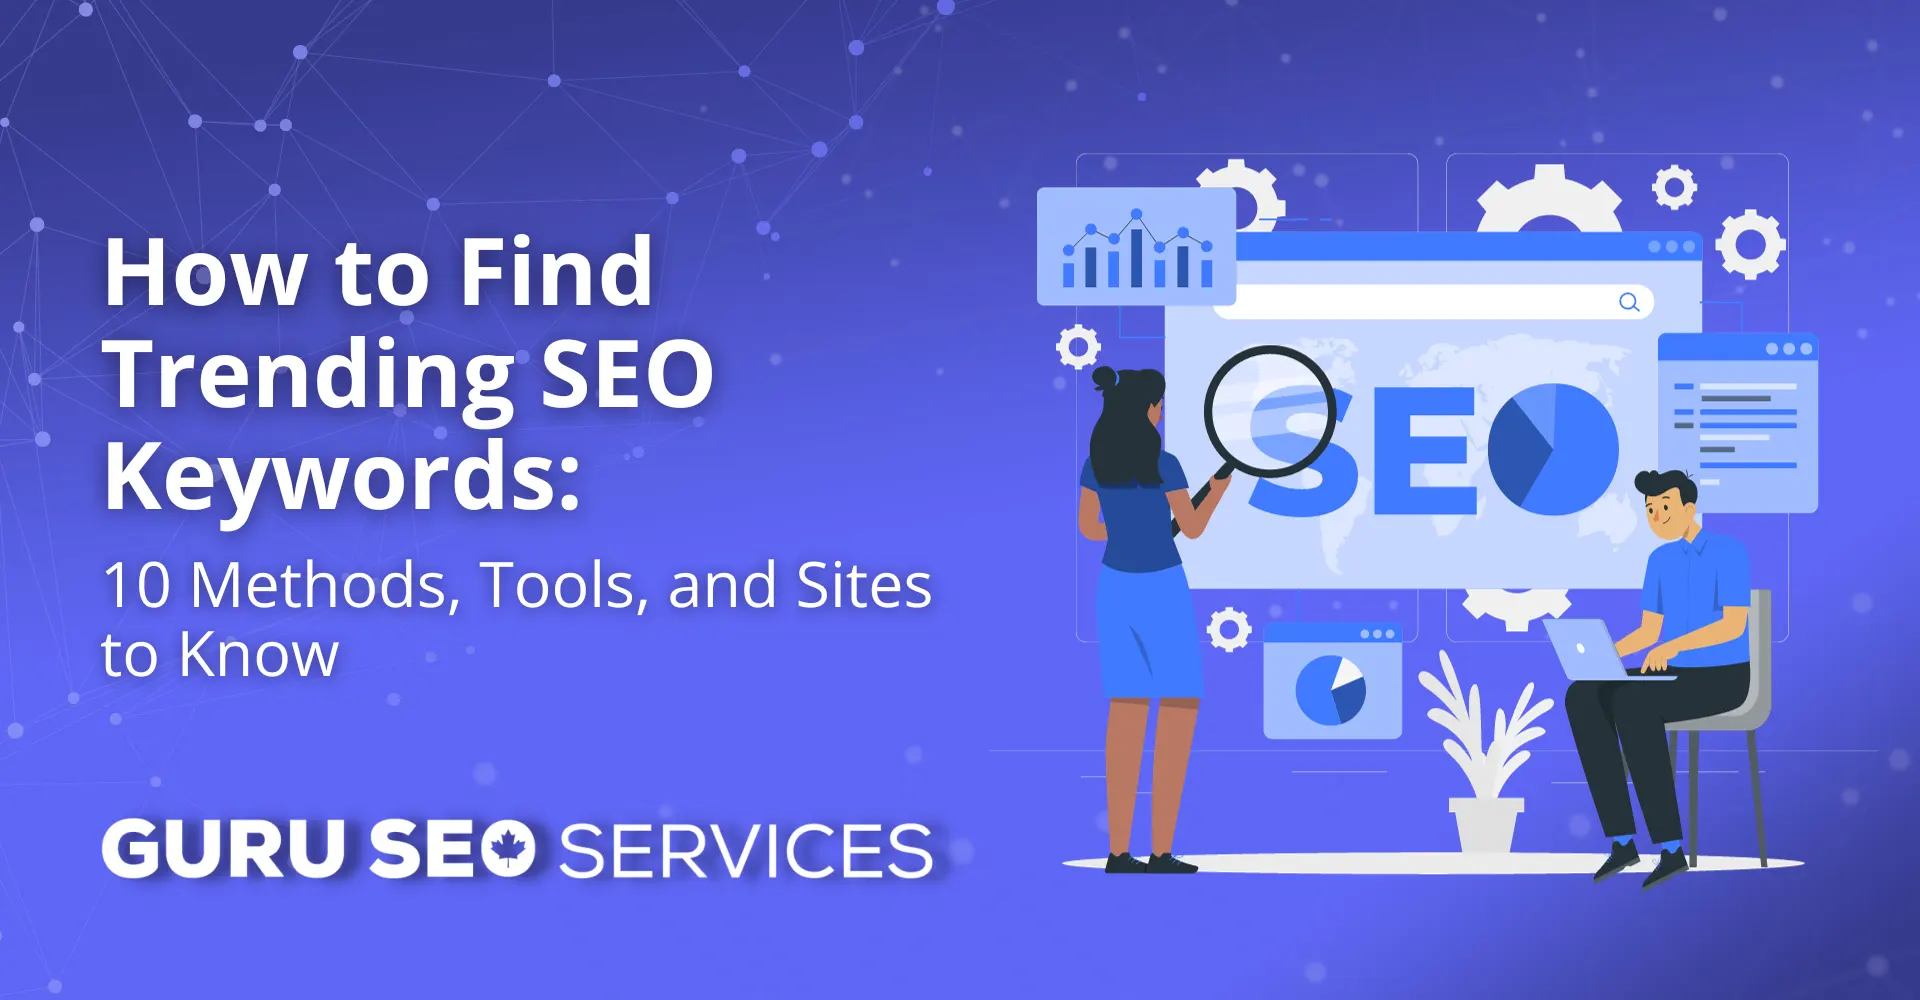 How to find trending seo keywords.